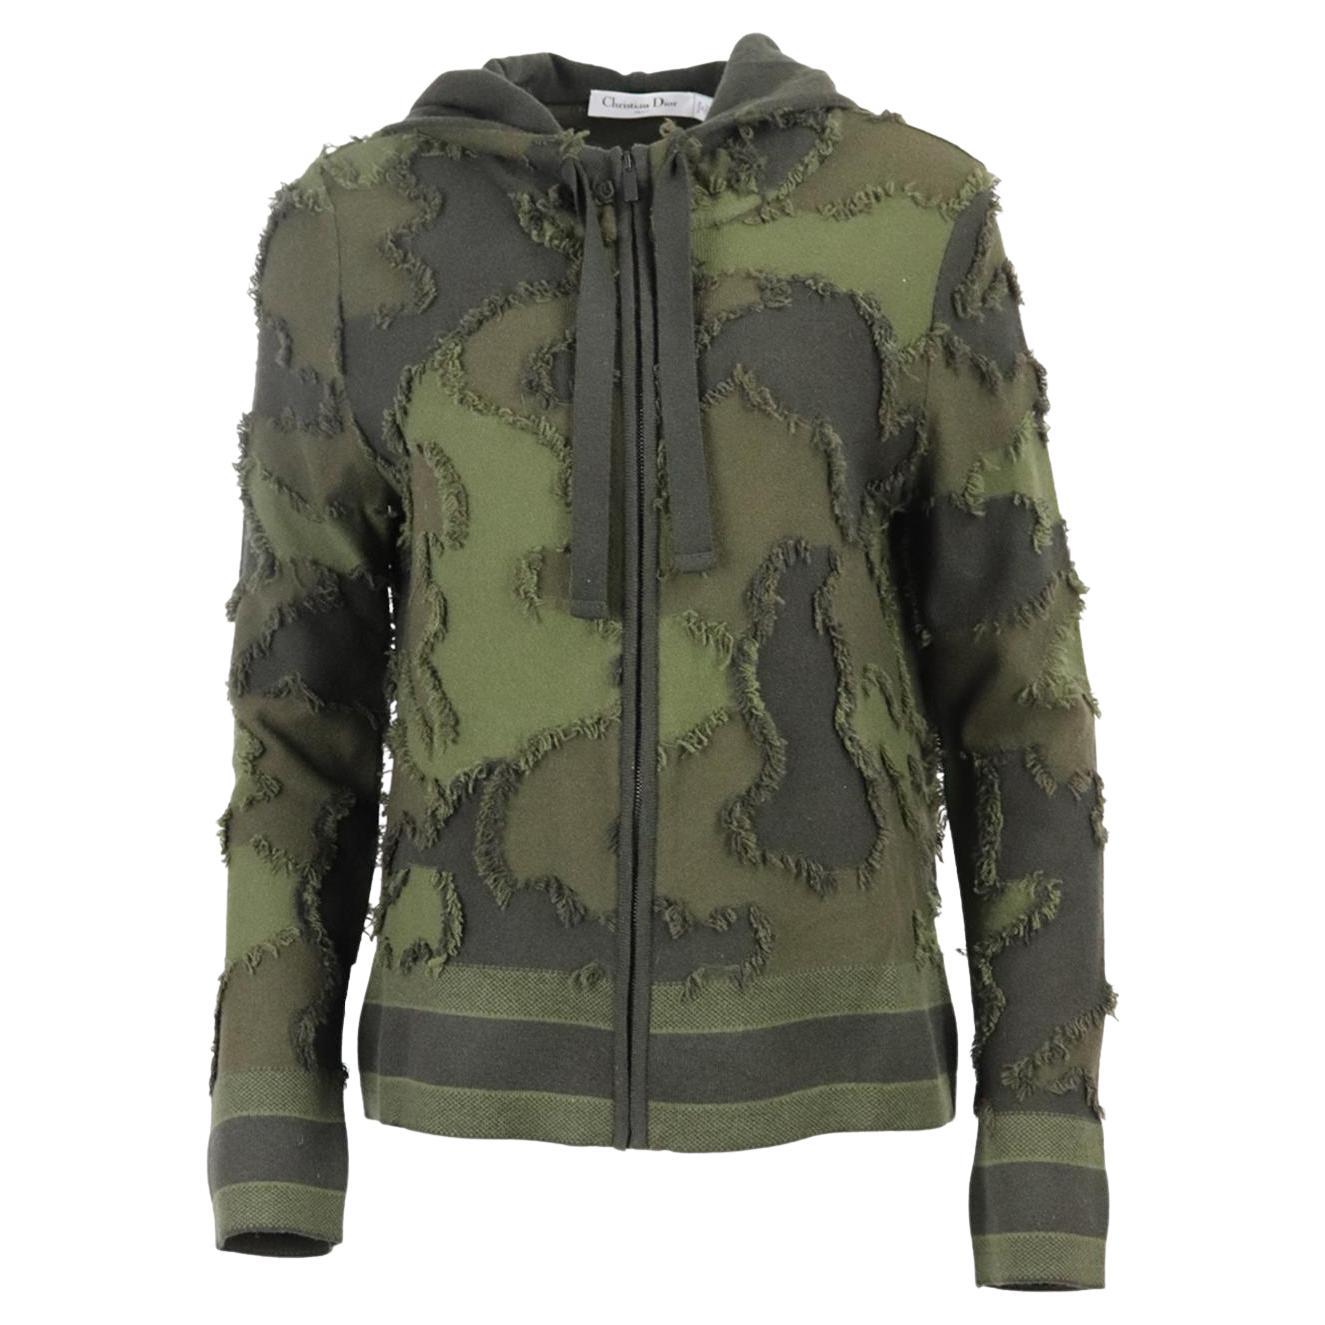 Christian Dior 2020 Camouflage Intarsia Cashmere Blend Hoodie Fr 44 Uk 16